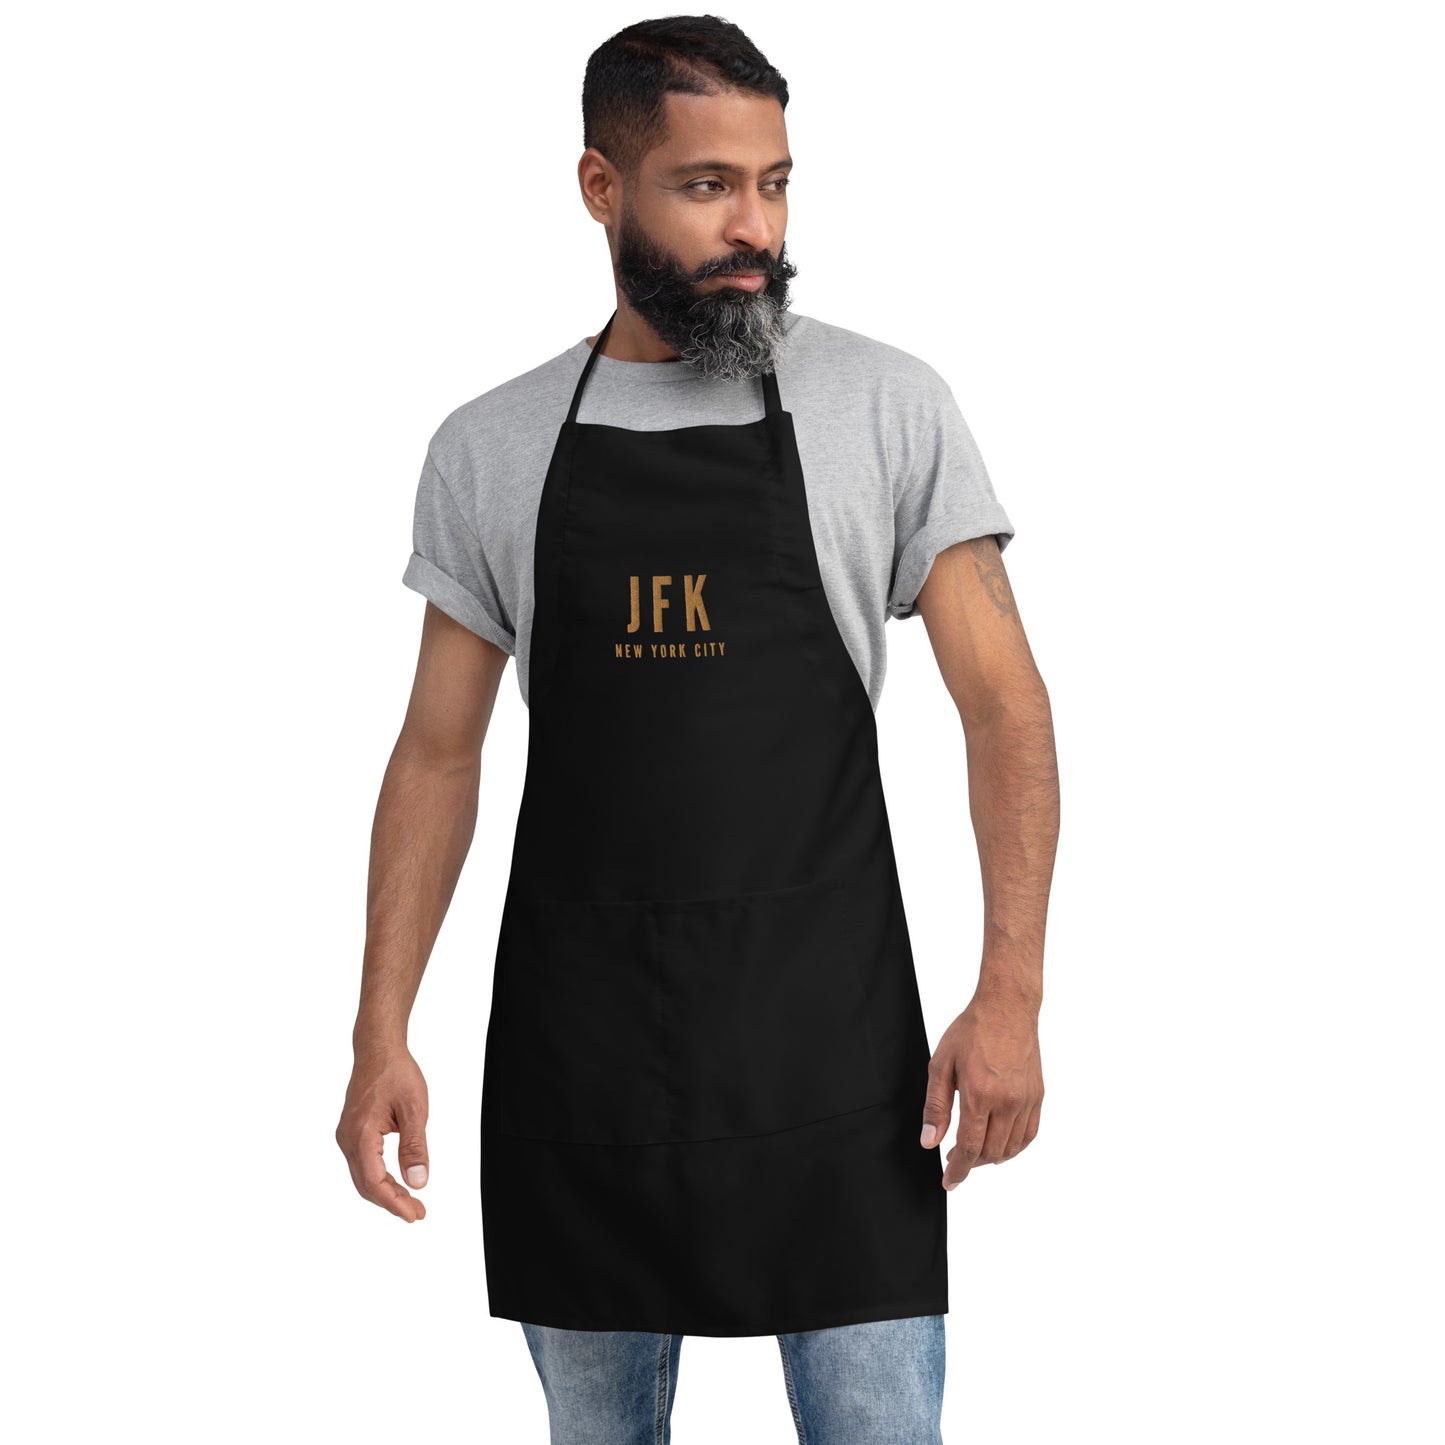 City Embroidered Apron - Old Gold • JFK New York City • YHM Designs - Image 05